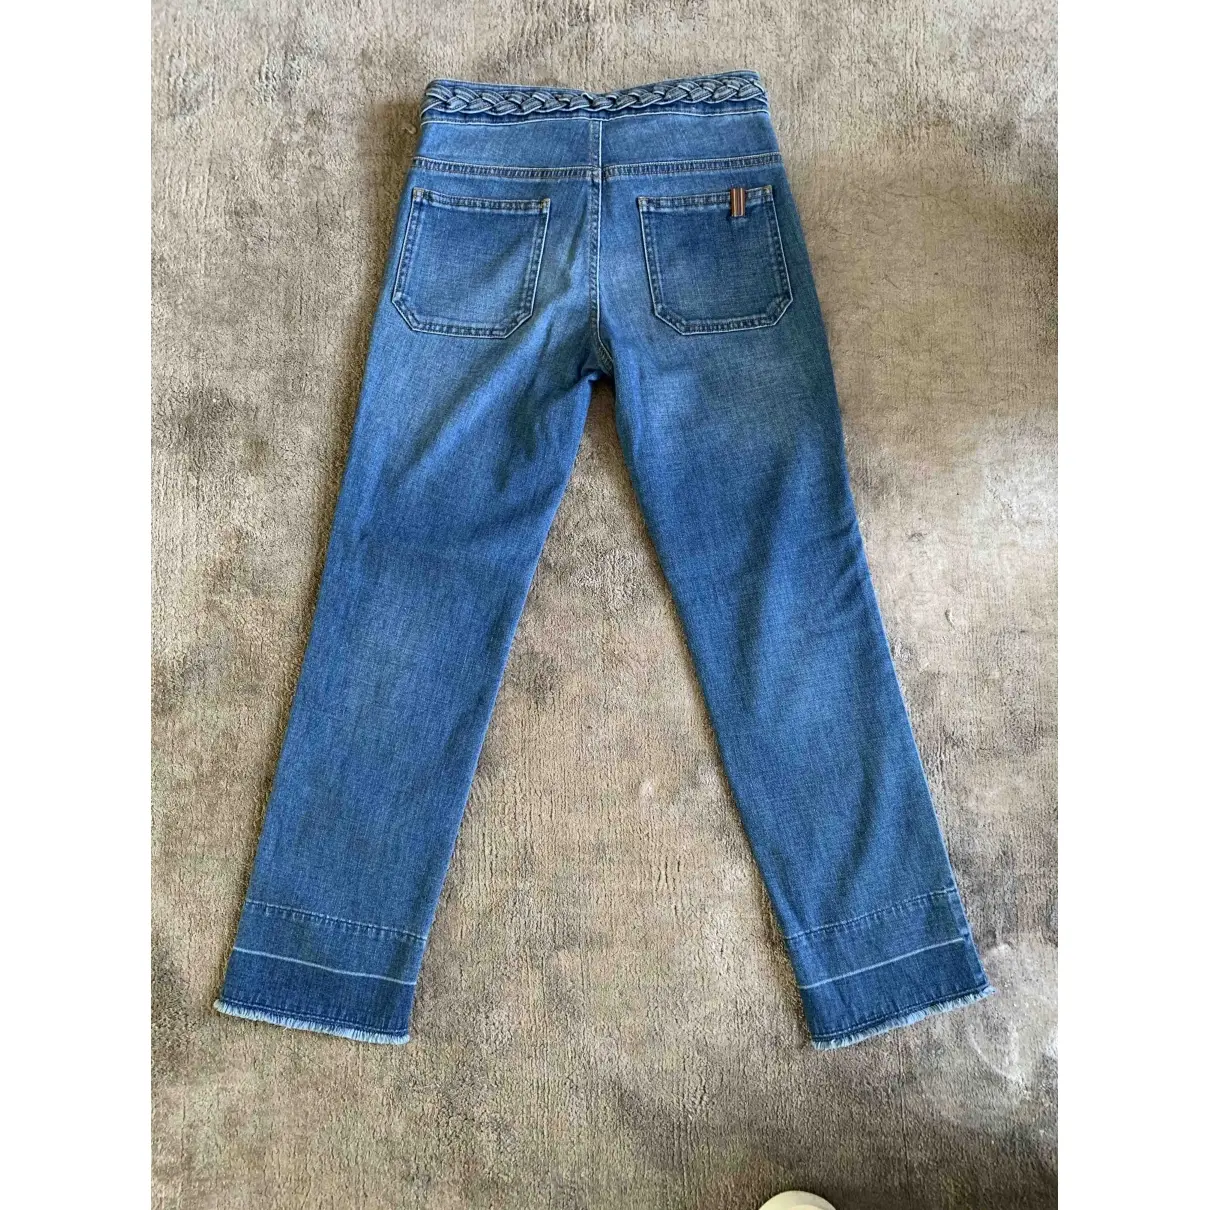 Notify Short jeans for sale